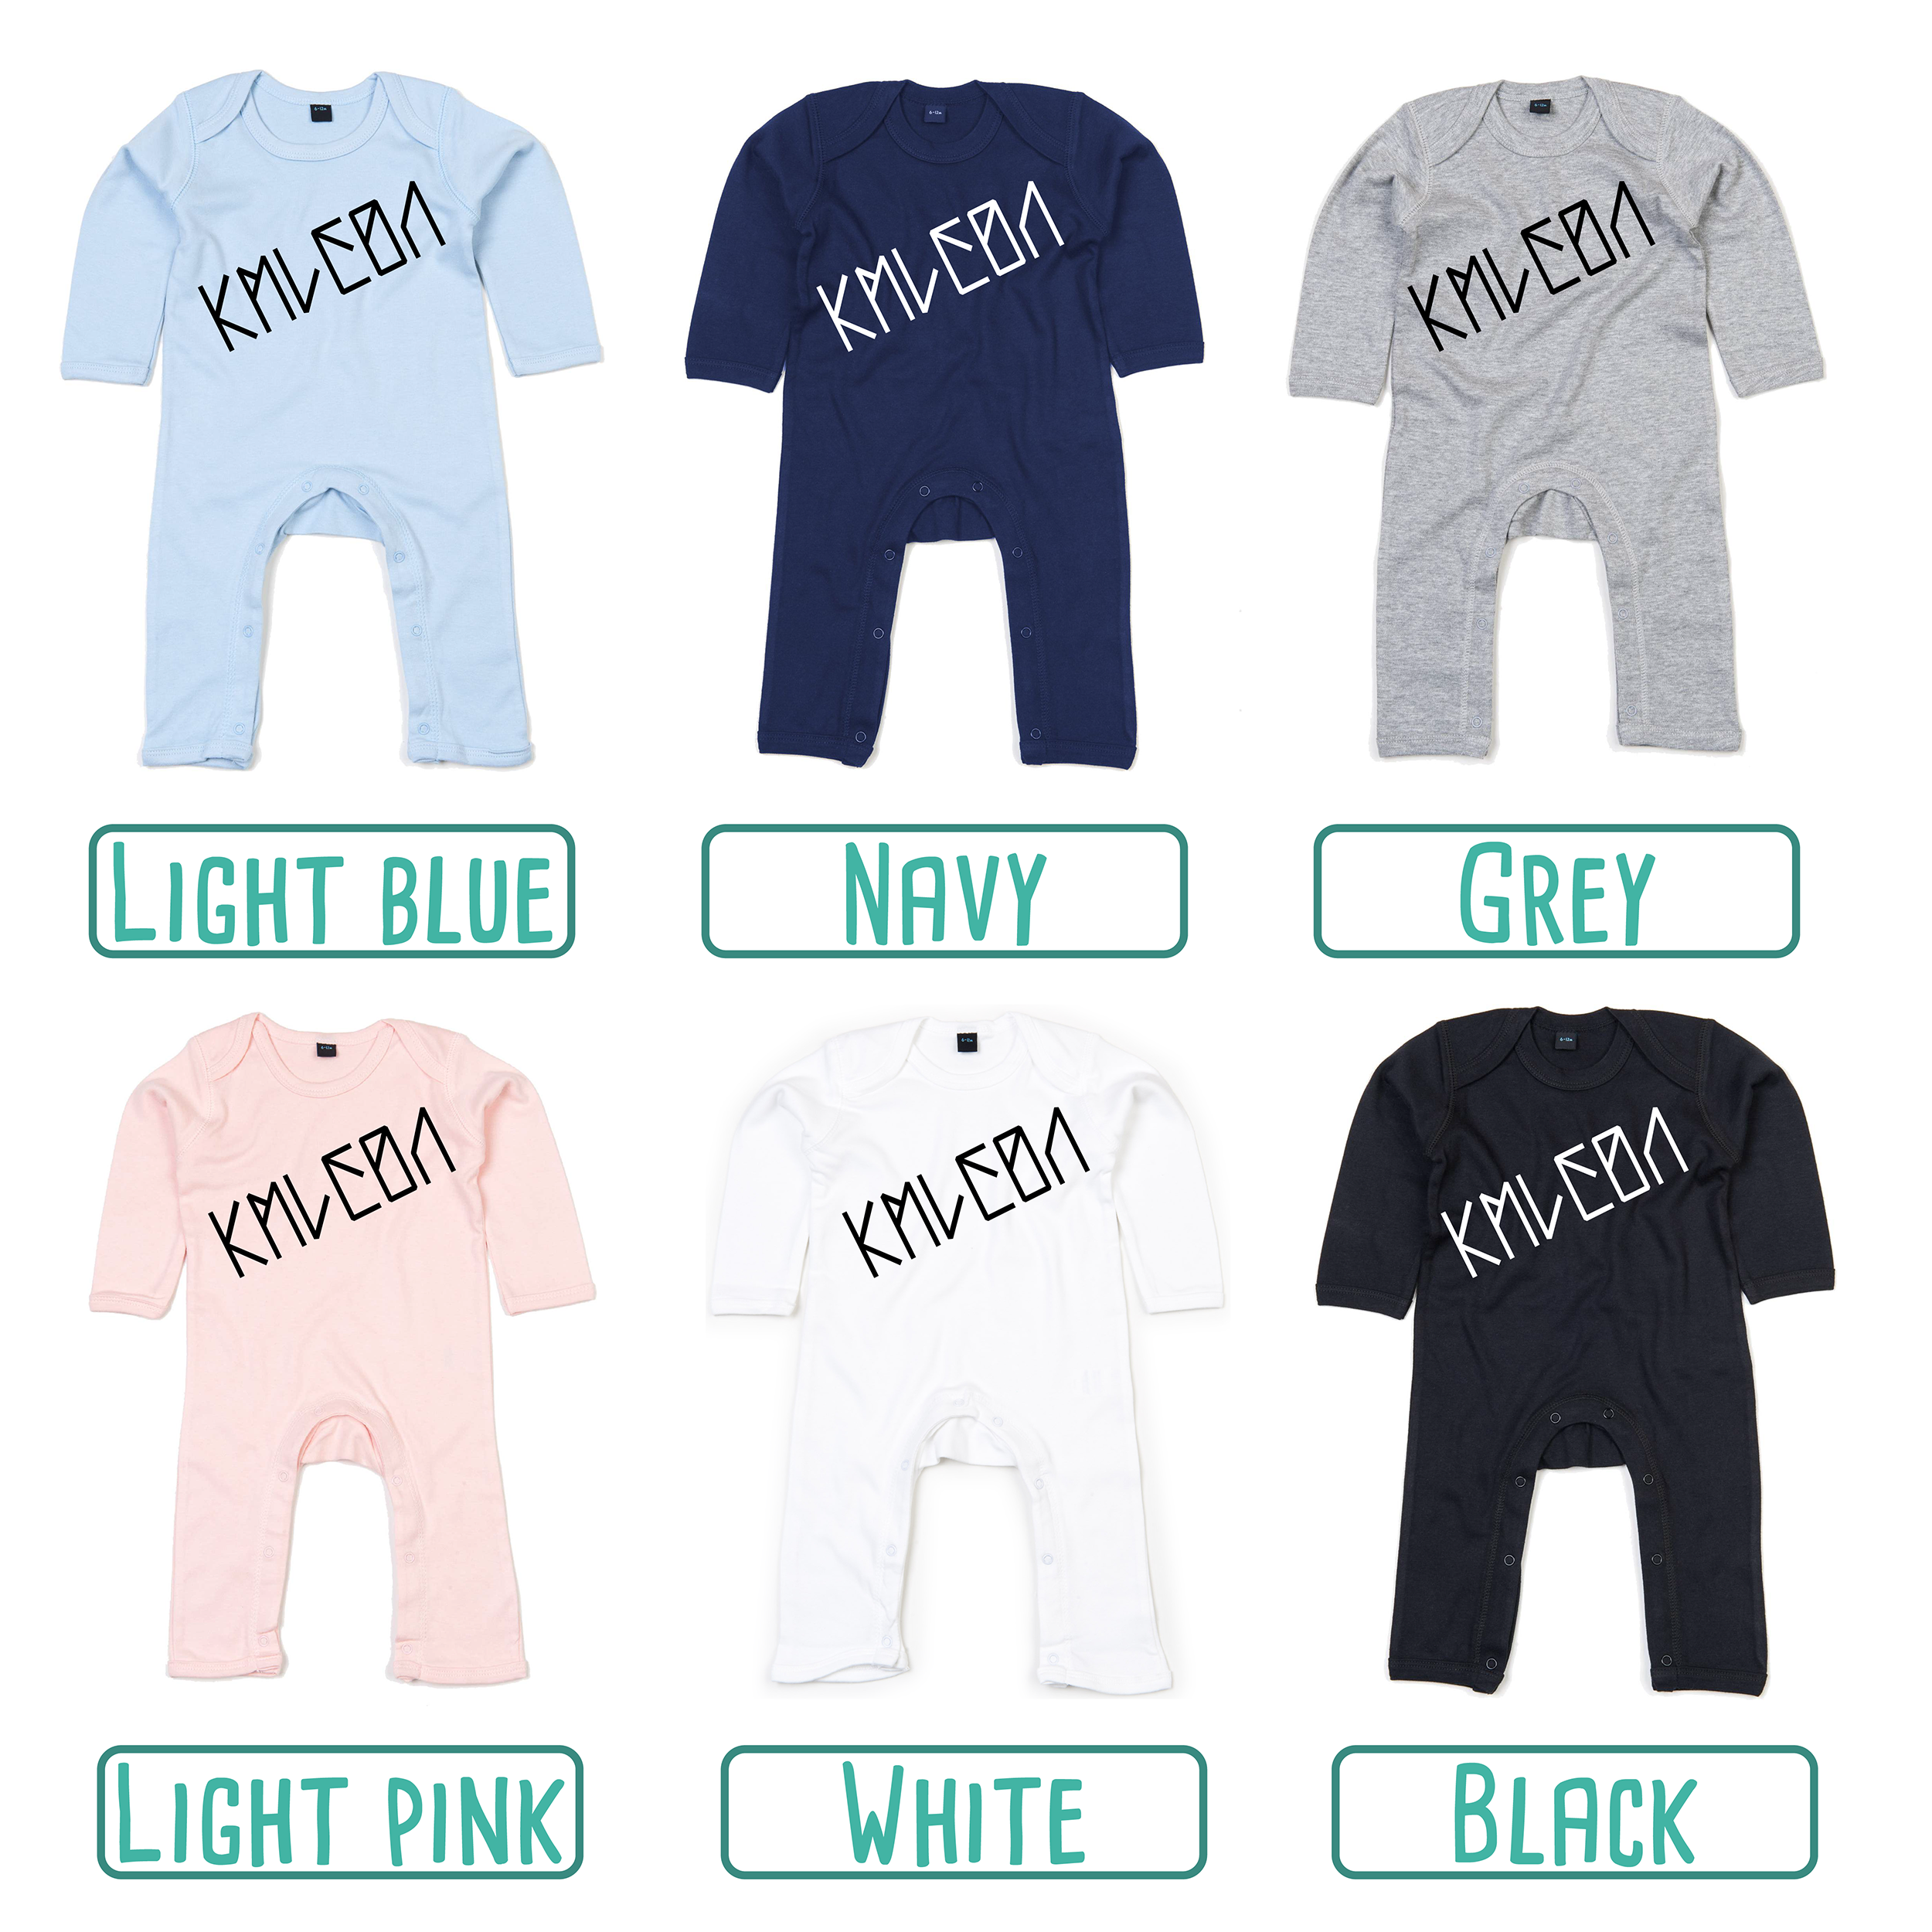 'First mate' baby romper